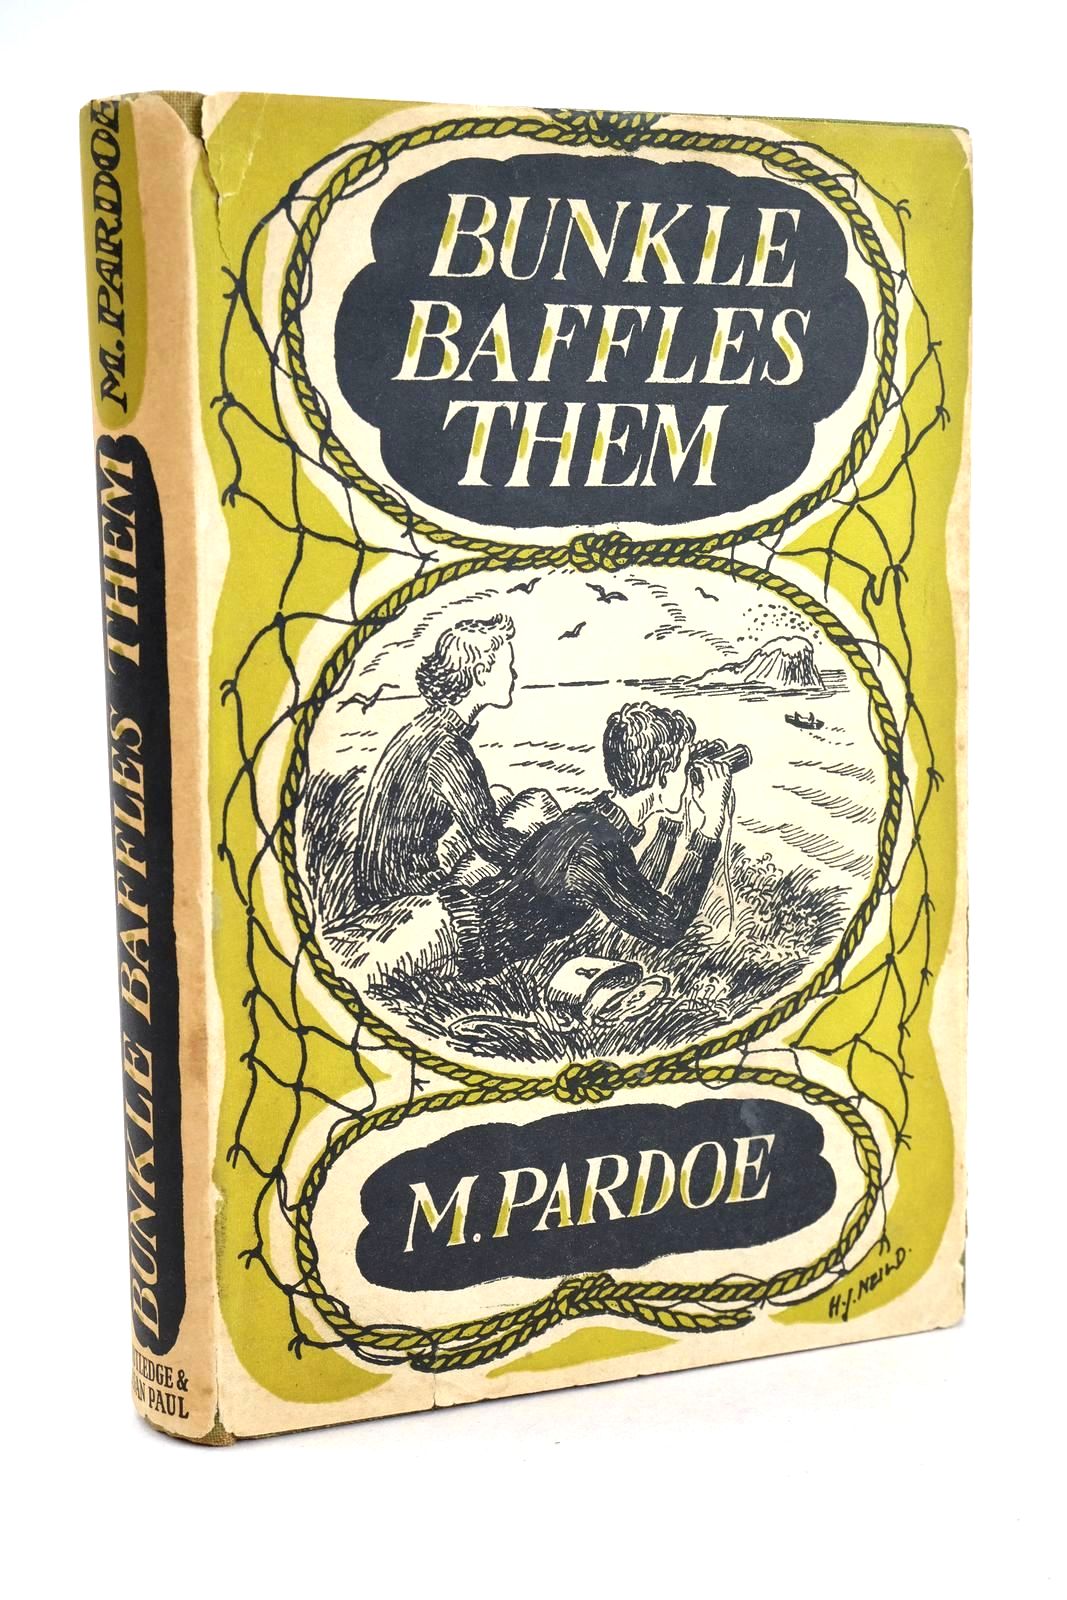 Photo of BUNKLE BAFFLES THEM written by Pardoe, M. illustrated by Neild, Julie published by Routledge &amp; Kegan Paul (STOCK CODE: 1326345)  for sale by Stella & Rose's Books